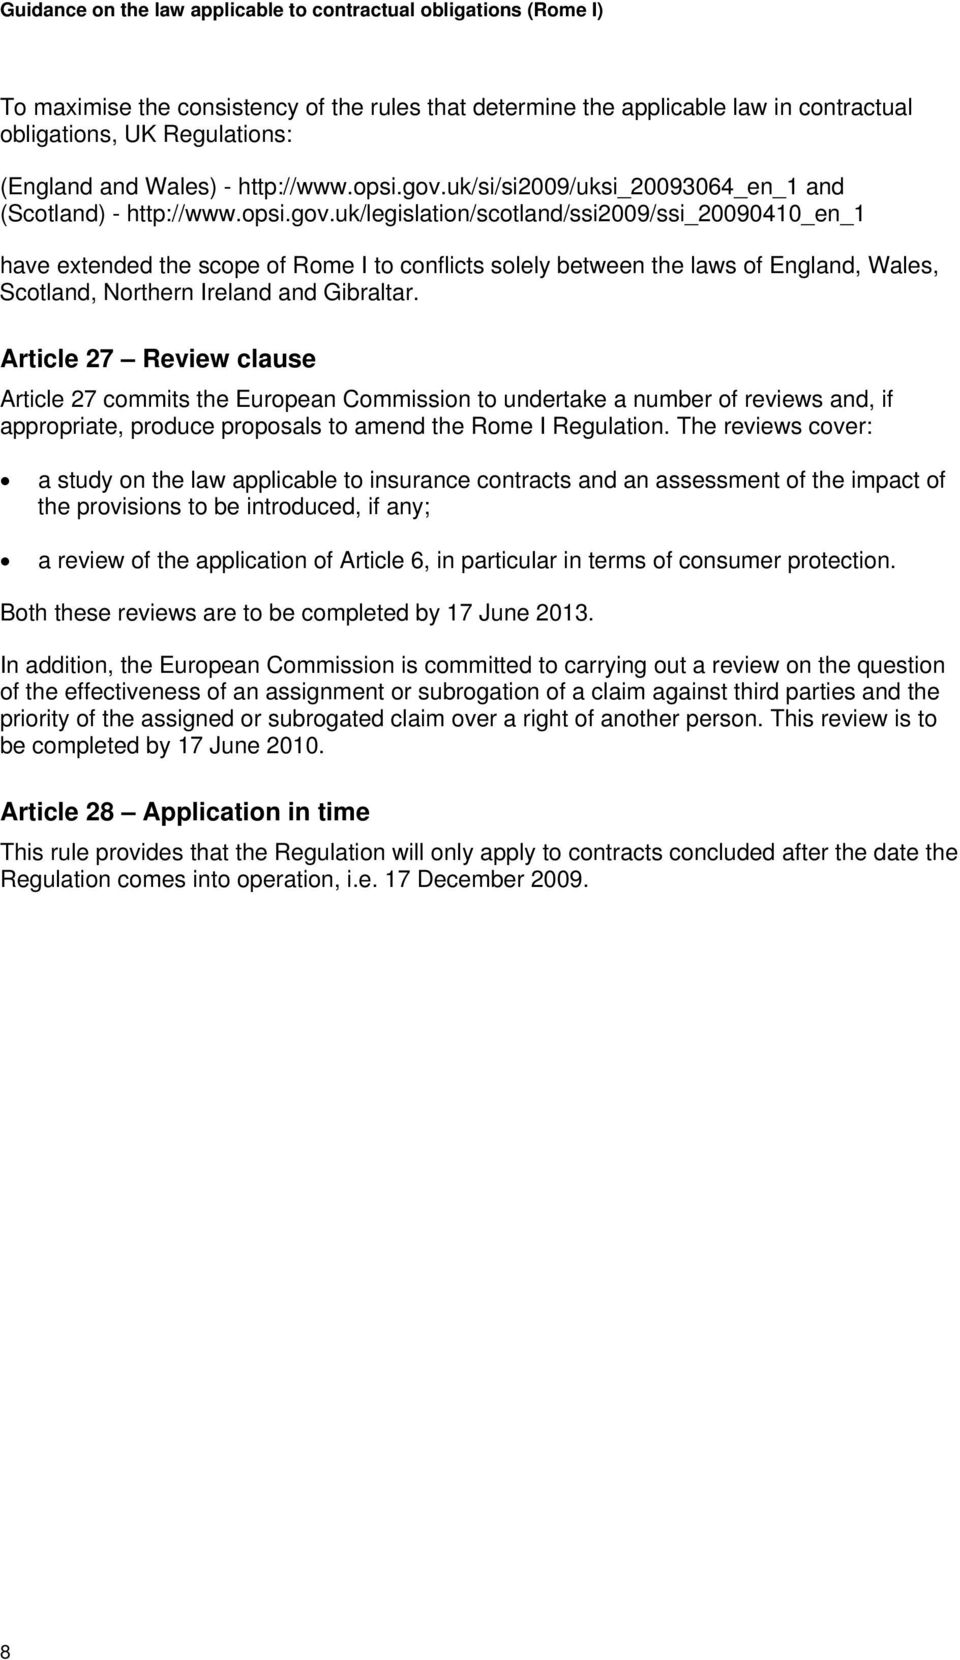 uk/legislation/scotland/ssi2009/ssi_20090410_en_1 have extended the scope of Rome I to conflicts solely between the laws of England, Wales, Scotland, Northern Ireland and Gibraltar.